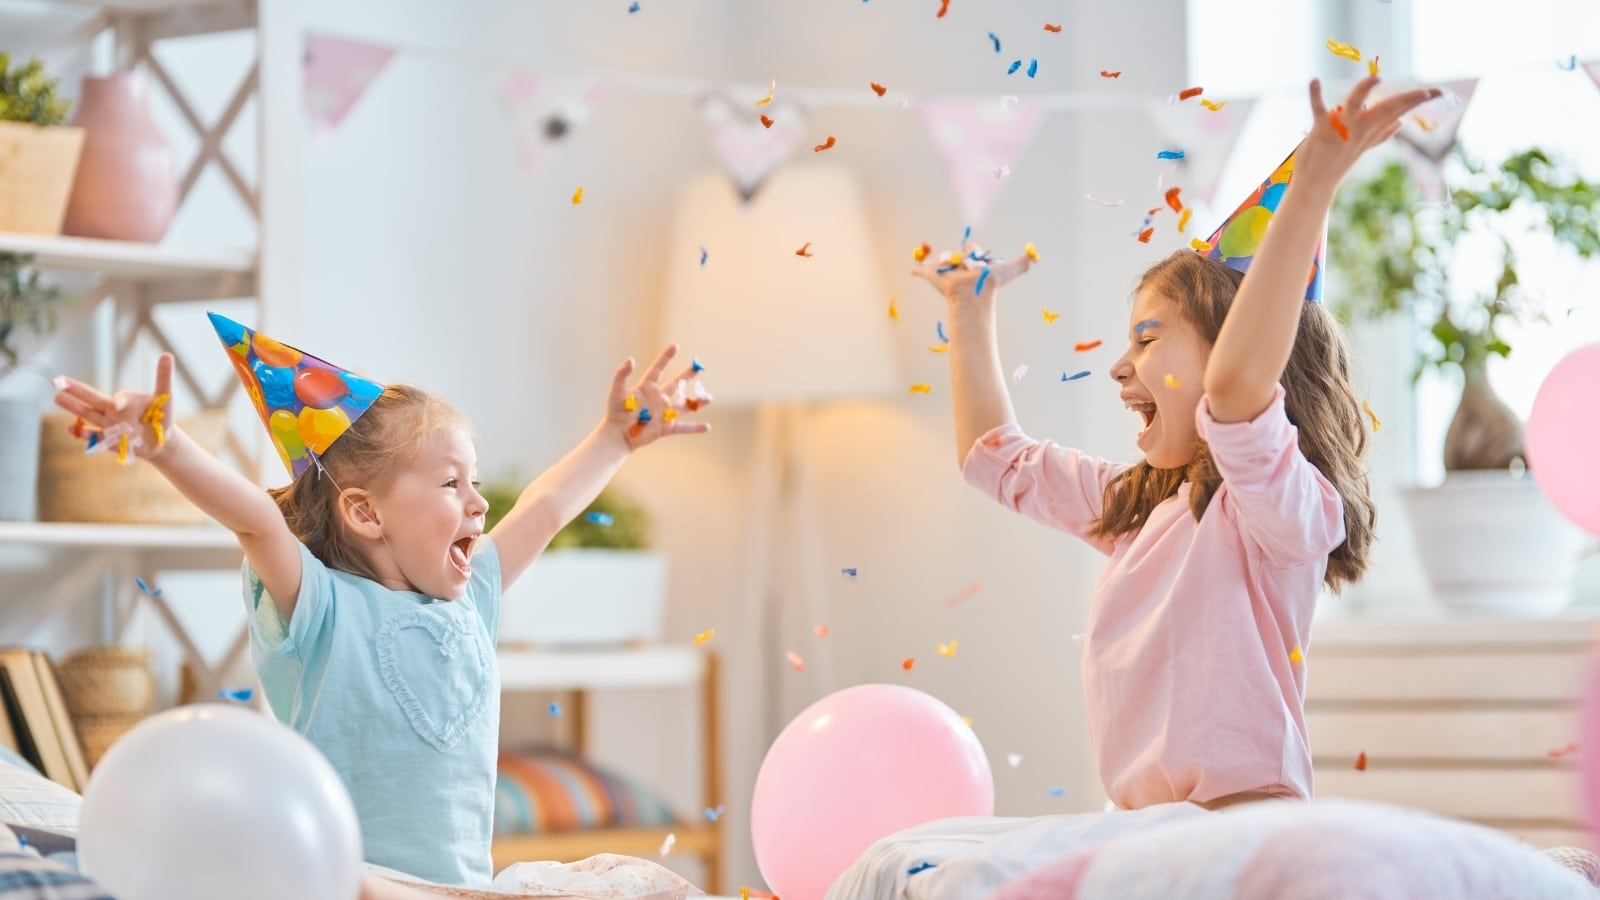 10 simple and fun New Year’s Eve ideas for kids